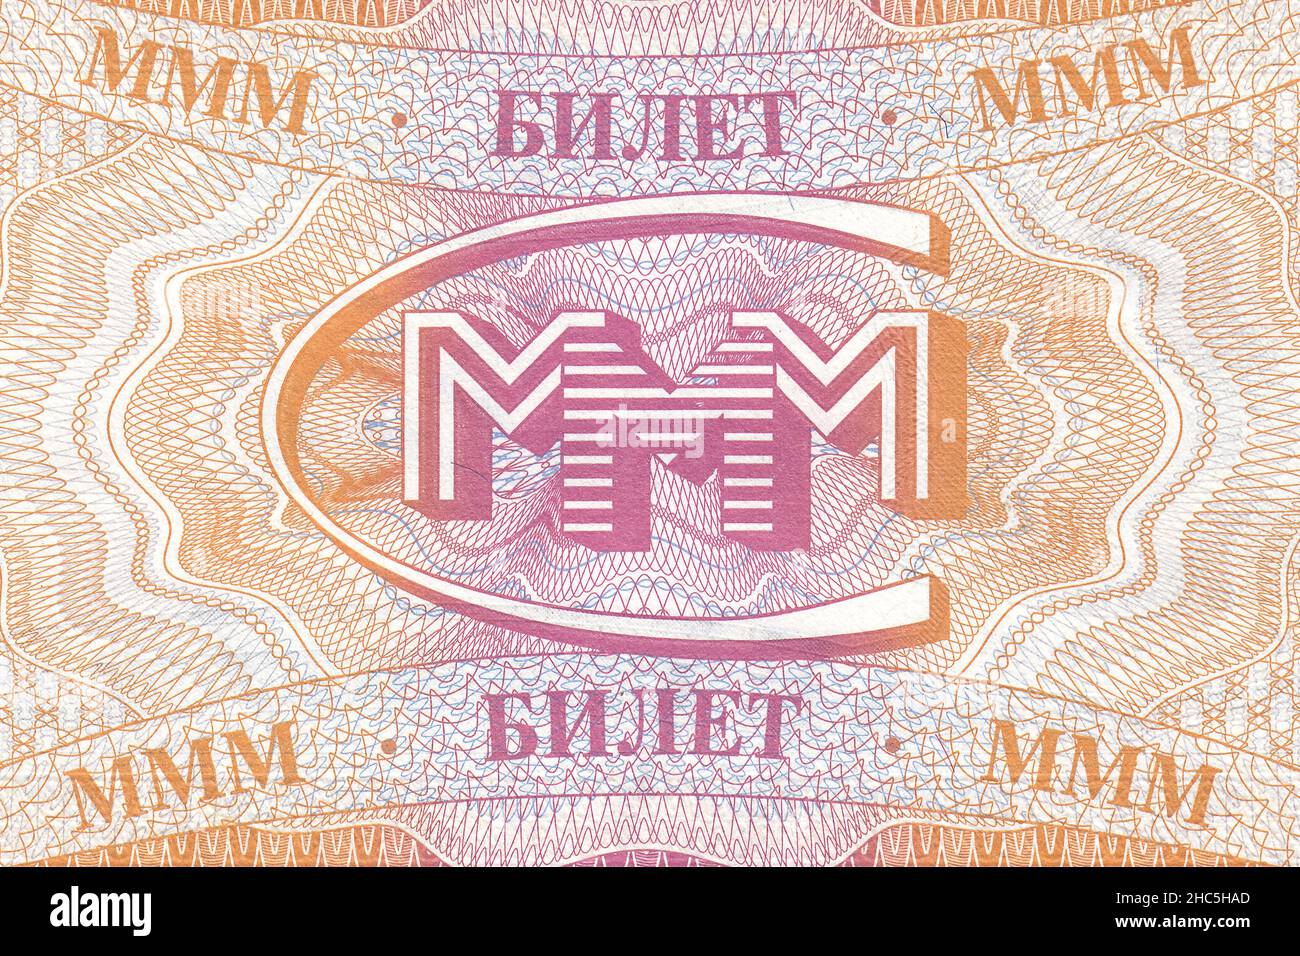 Bill for 20 tickets of the MMM financial pyramid with a large logo, 1994. Back side. The financial pyramid of MMM was created in the 1990s in Russia. Stock Photo